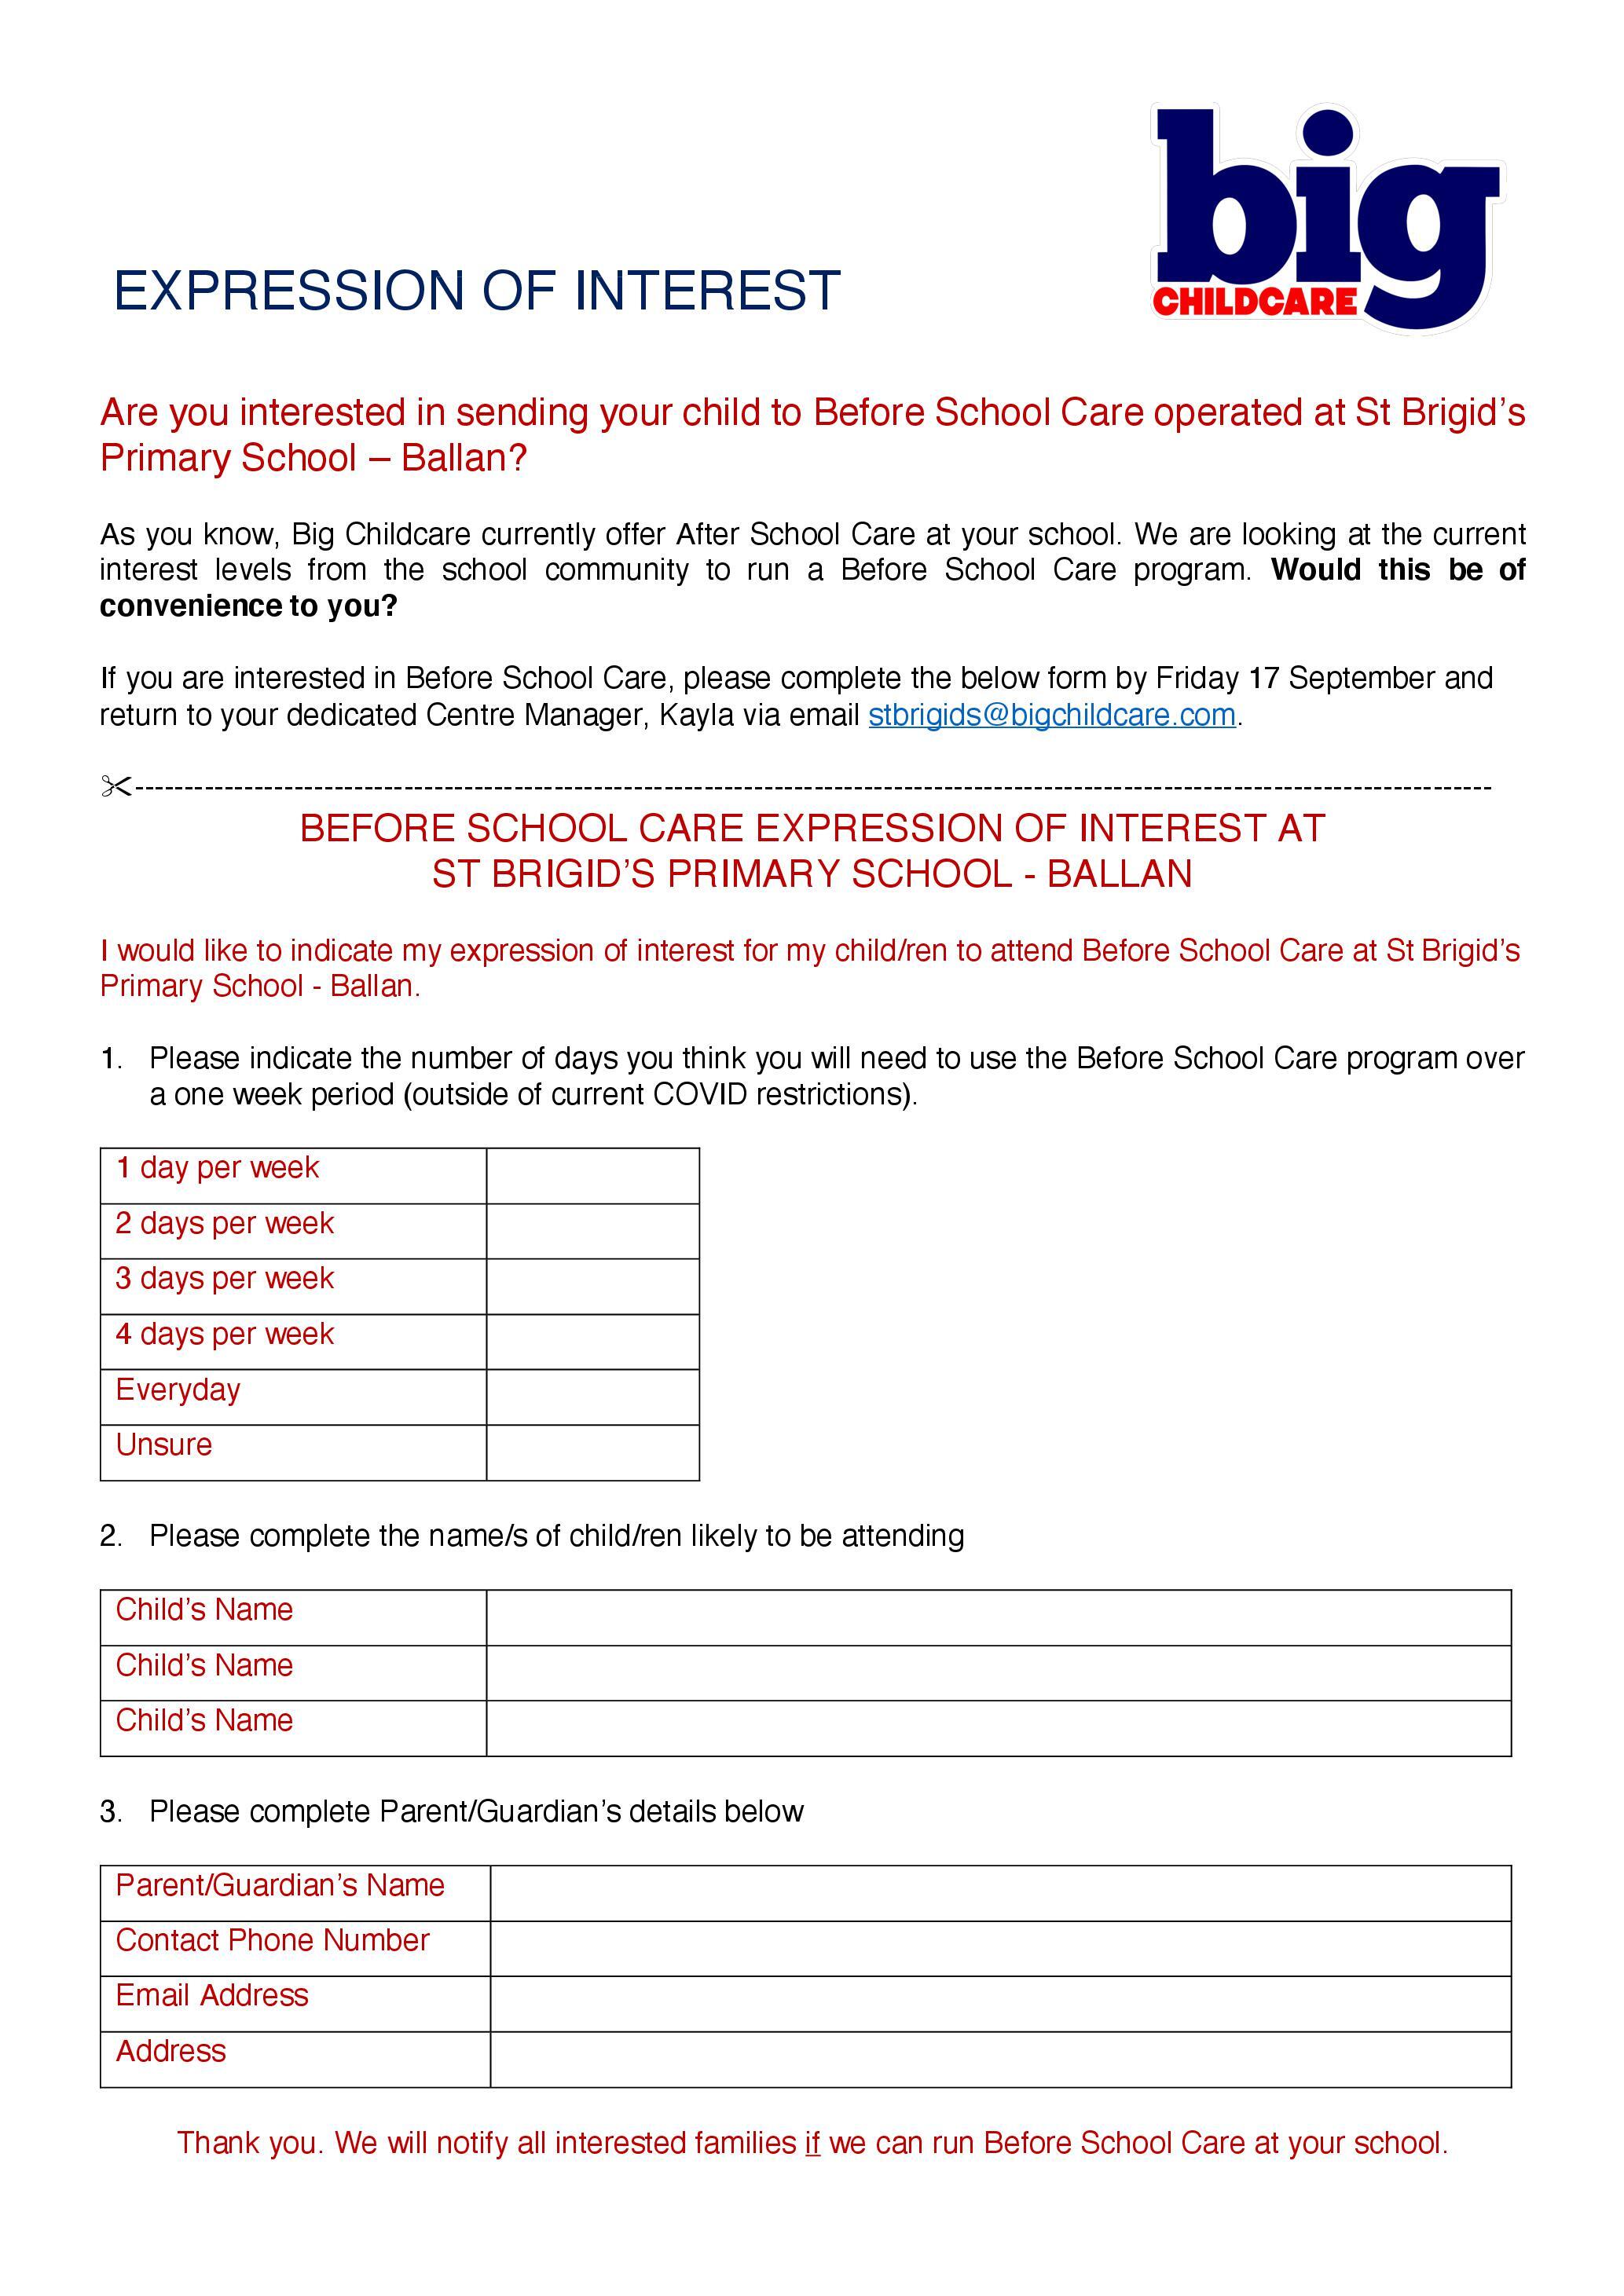 EXPRESSION OF INTEREST BIG Before School Care St Brigids 20210906 (1)_Page_1